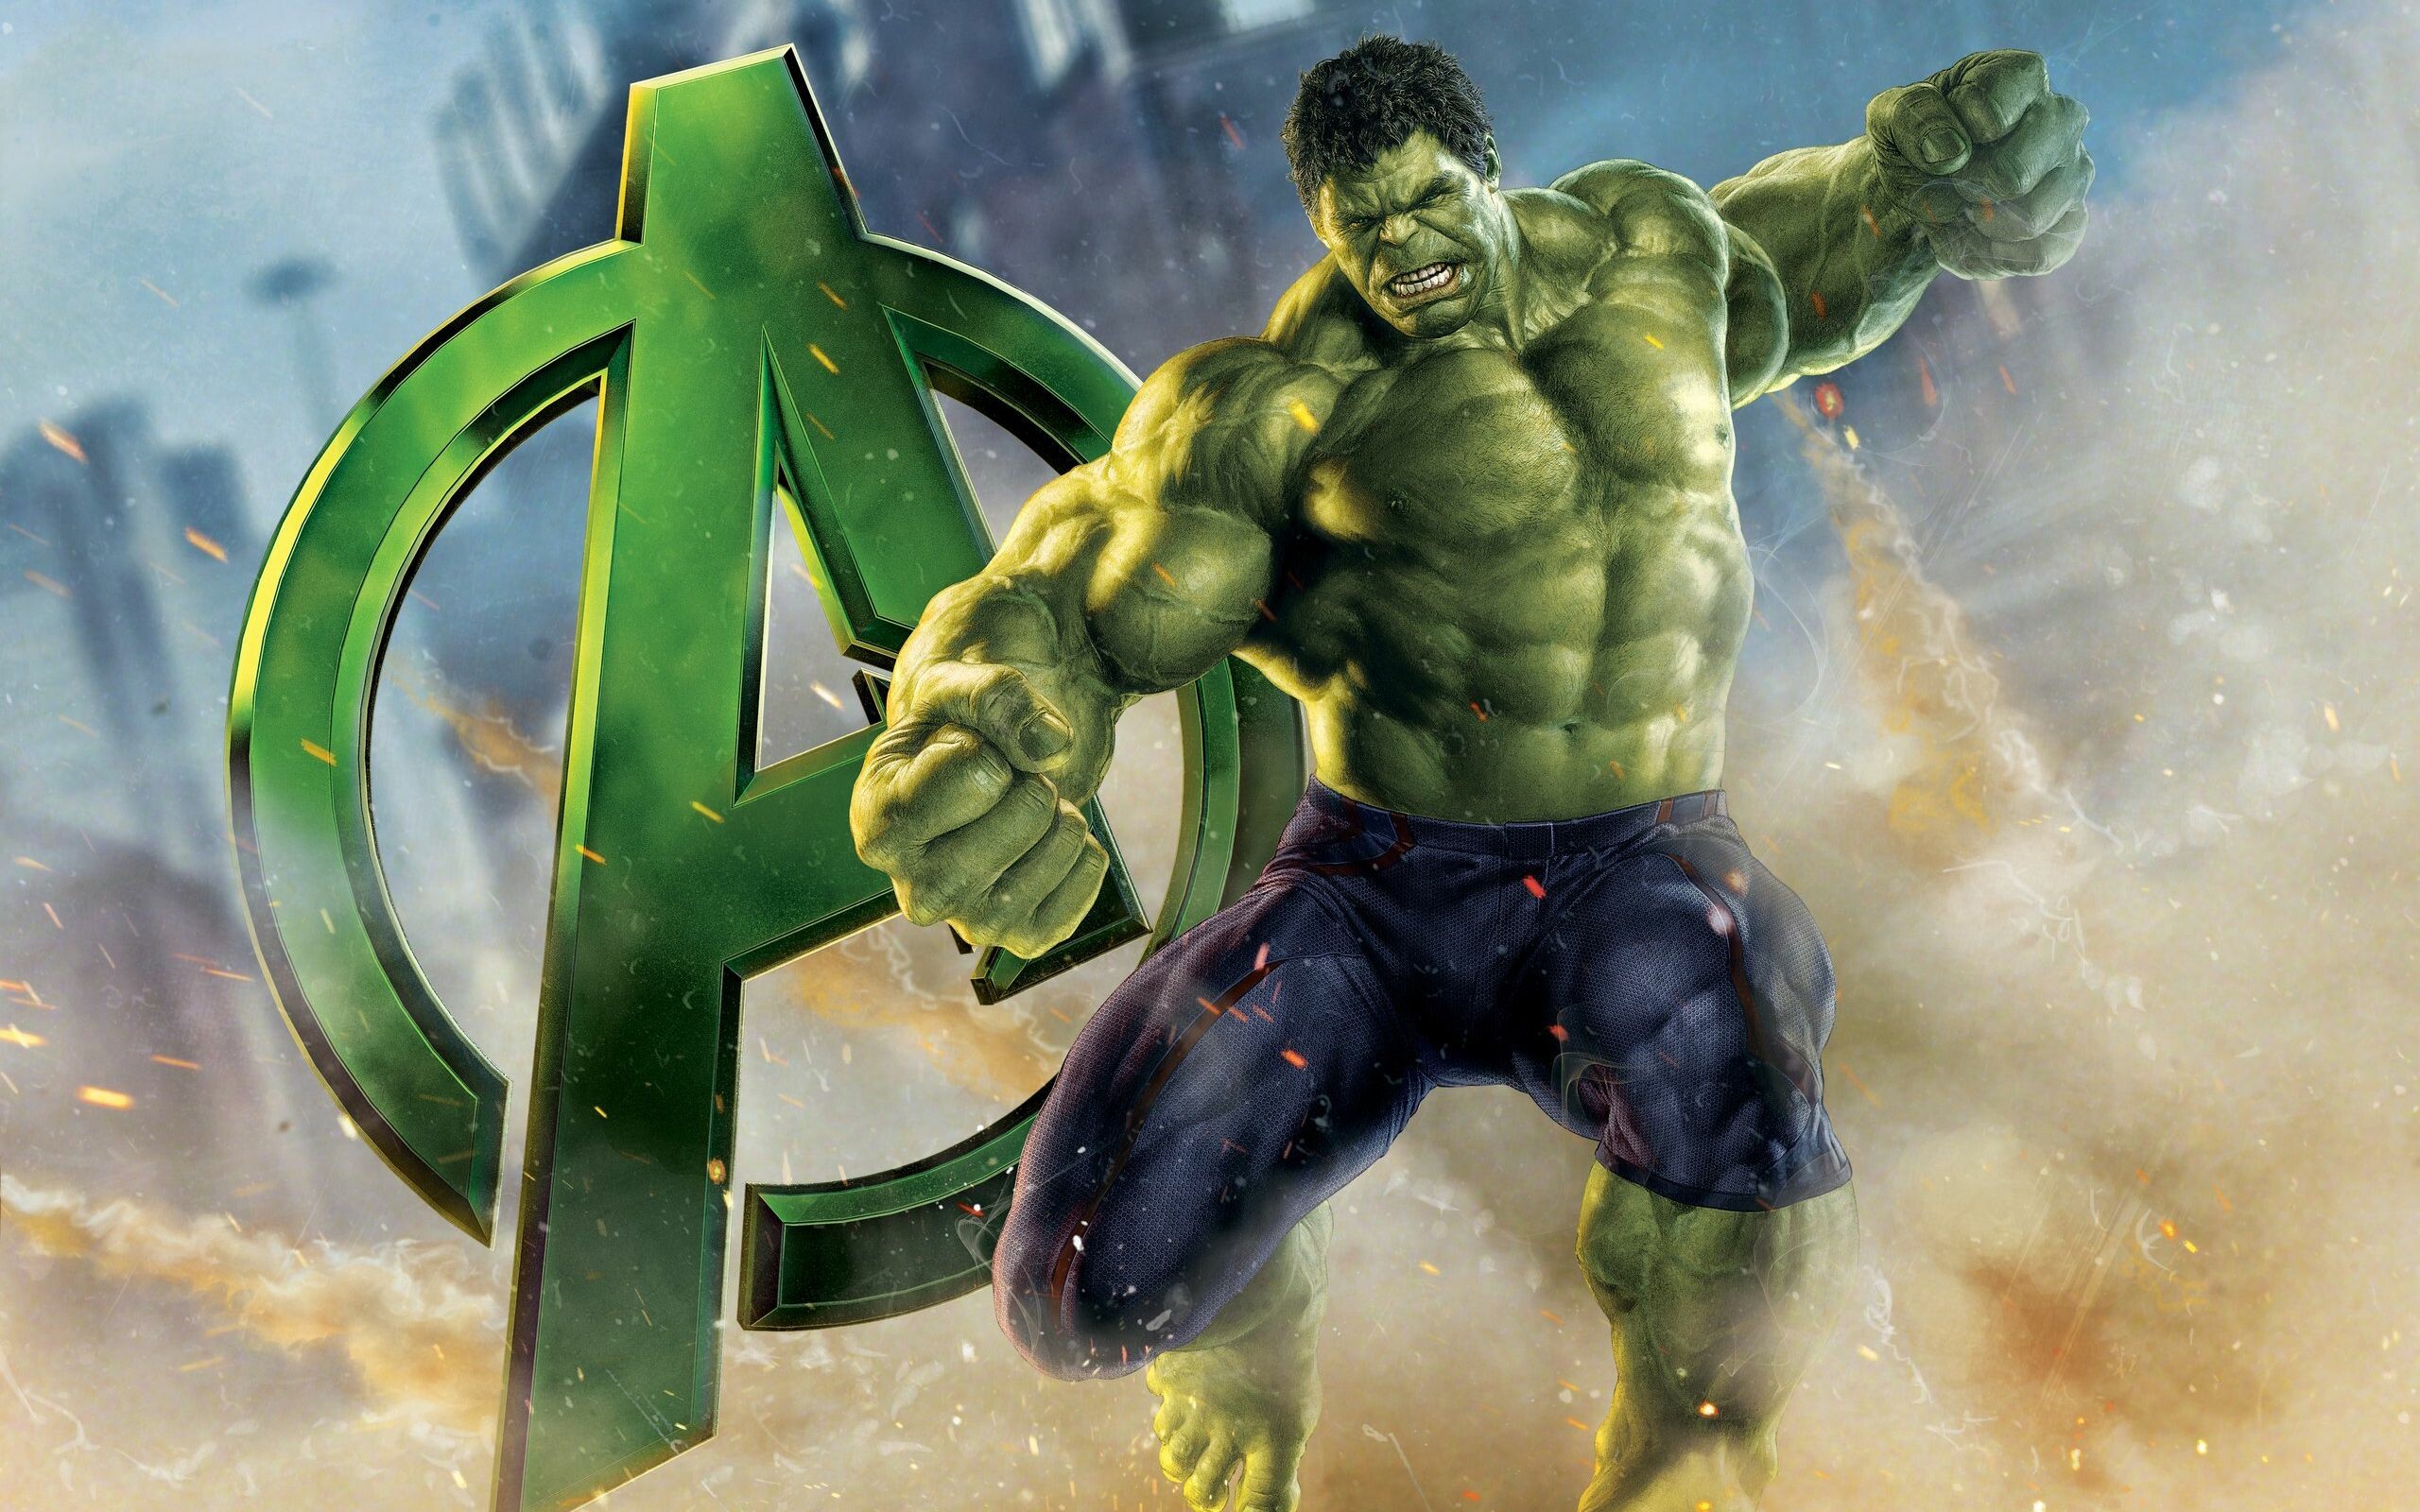 Hulk: An Avenger and genius scientist who, because of exposure to gamma radiation, transforms into a monster when enraged or agitated. 2560x1600 HD Background.